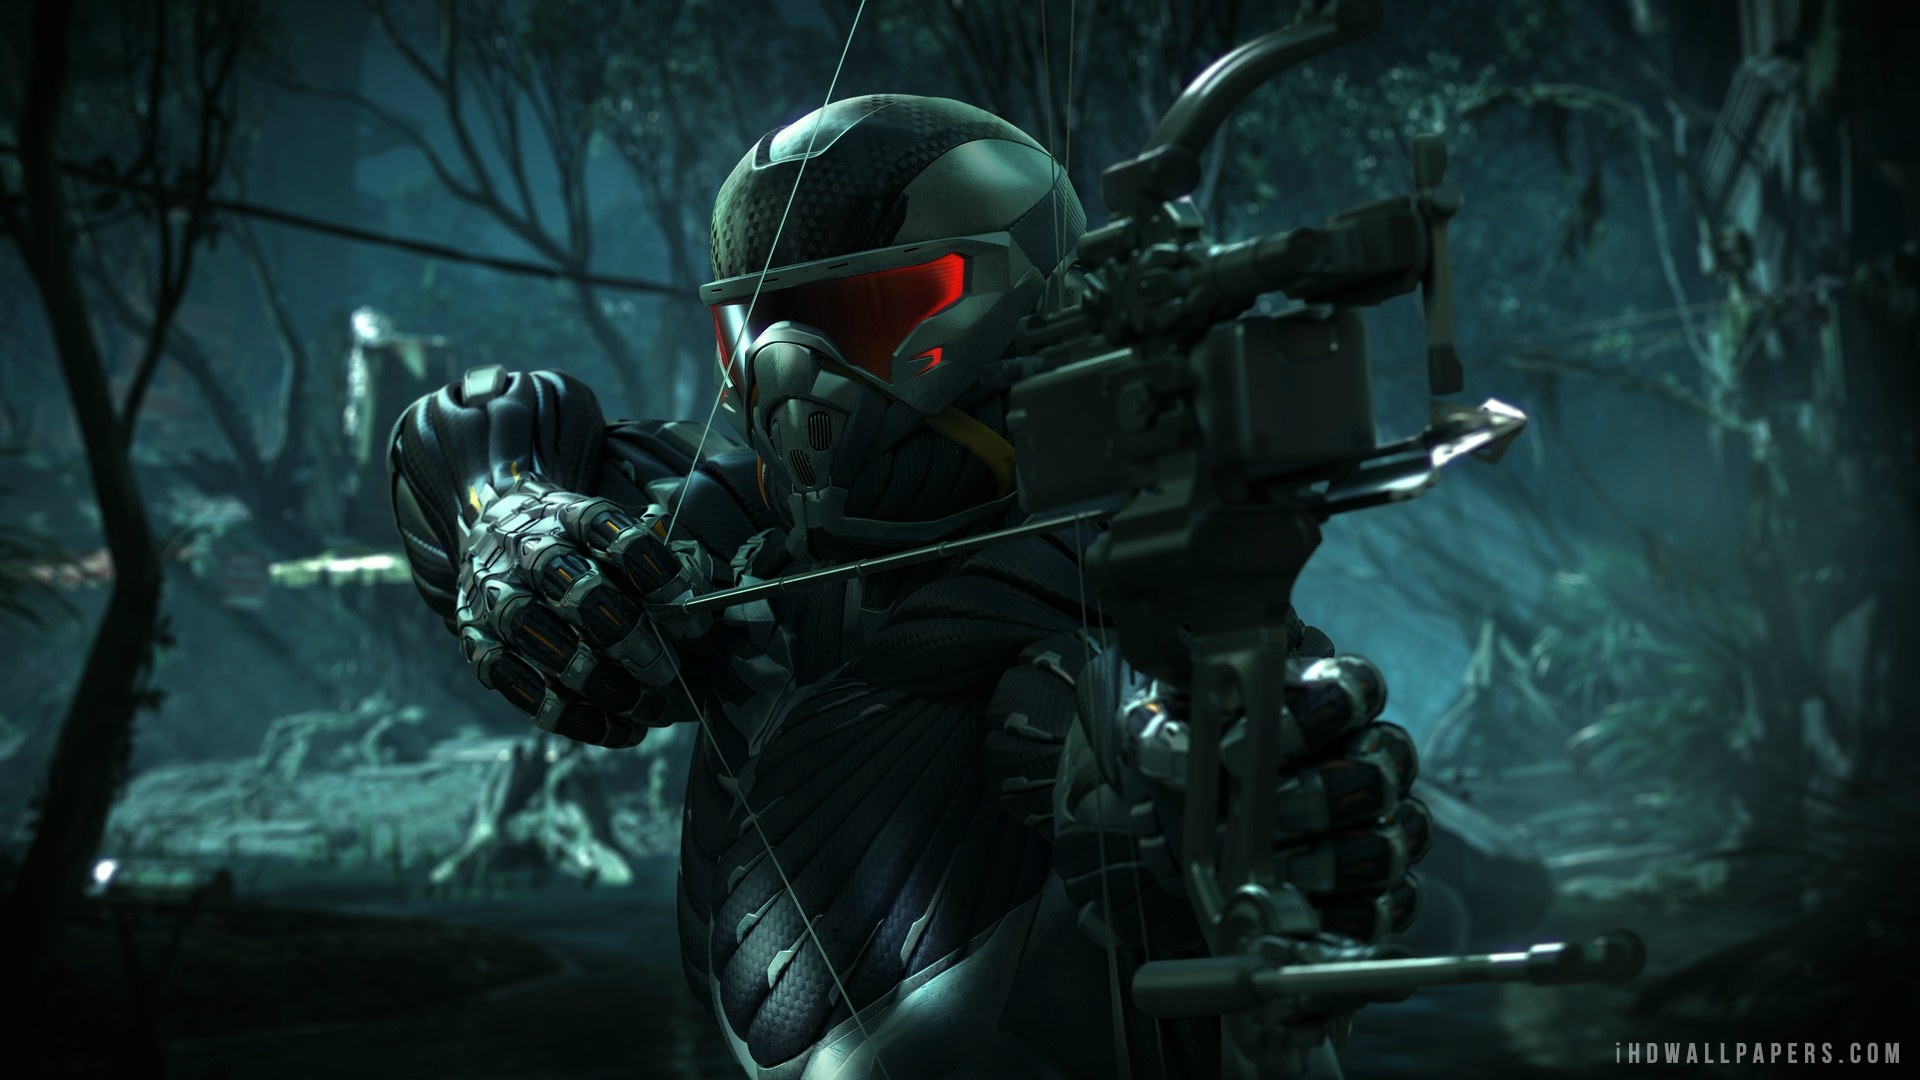 Crysis Concept Art Wallpaper Background In